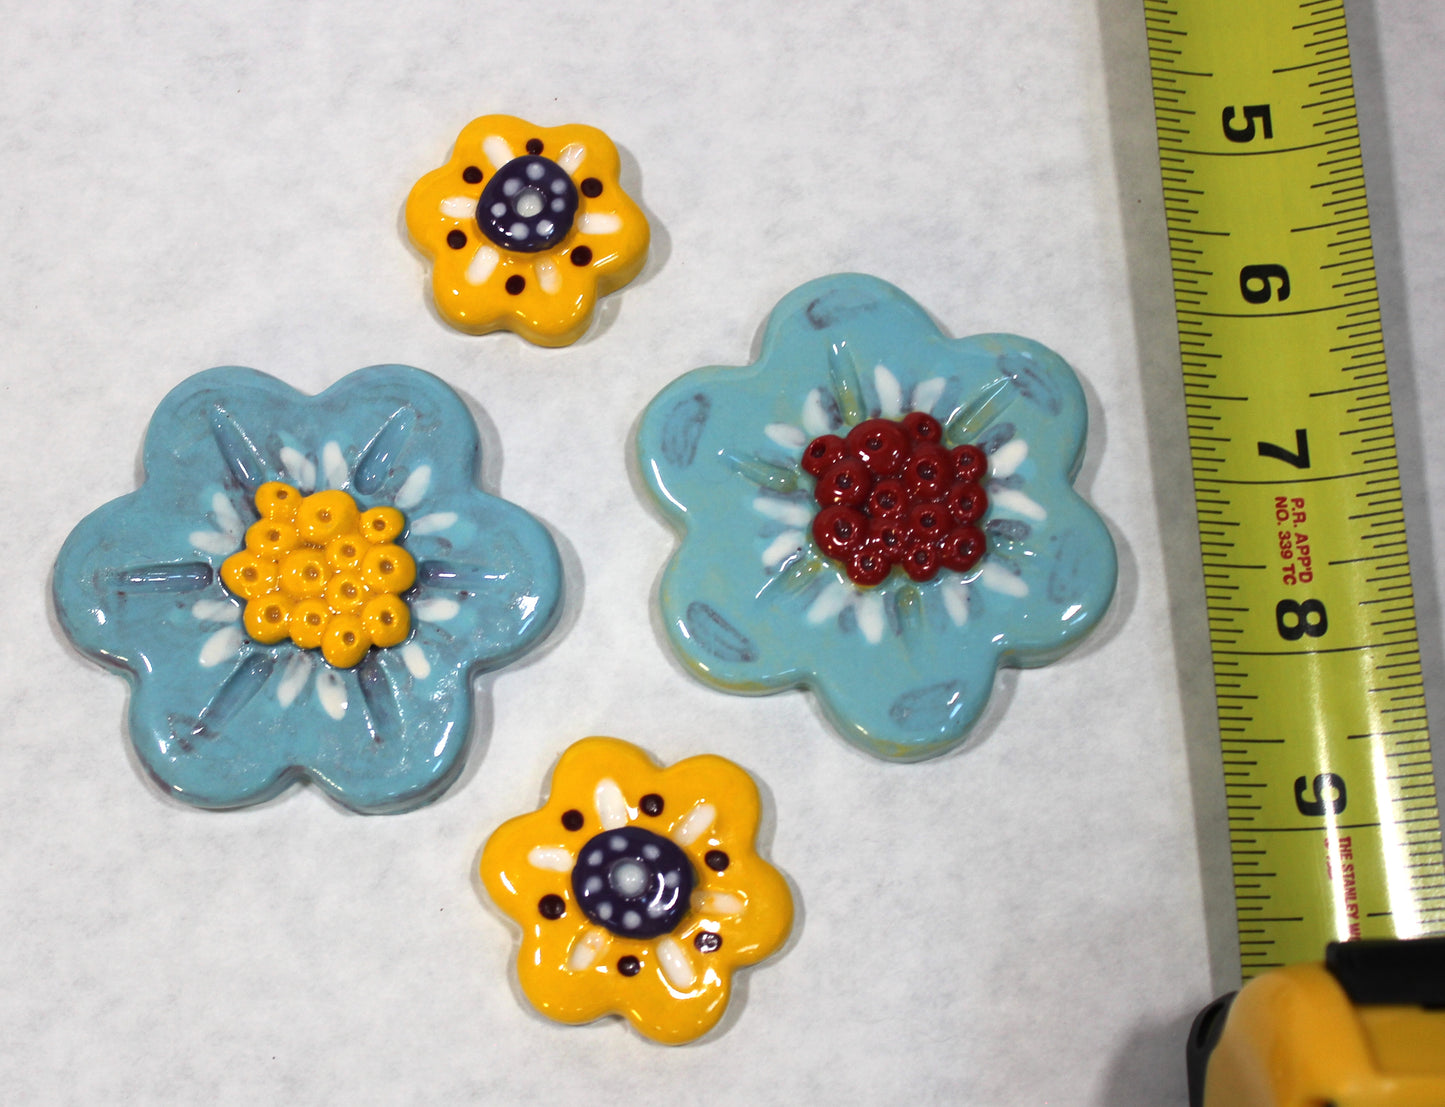 Ceramic Decorative Blue and Yellow Flower Tile Set of Four